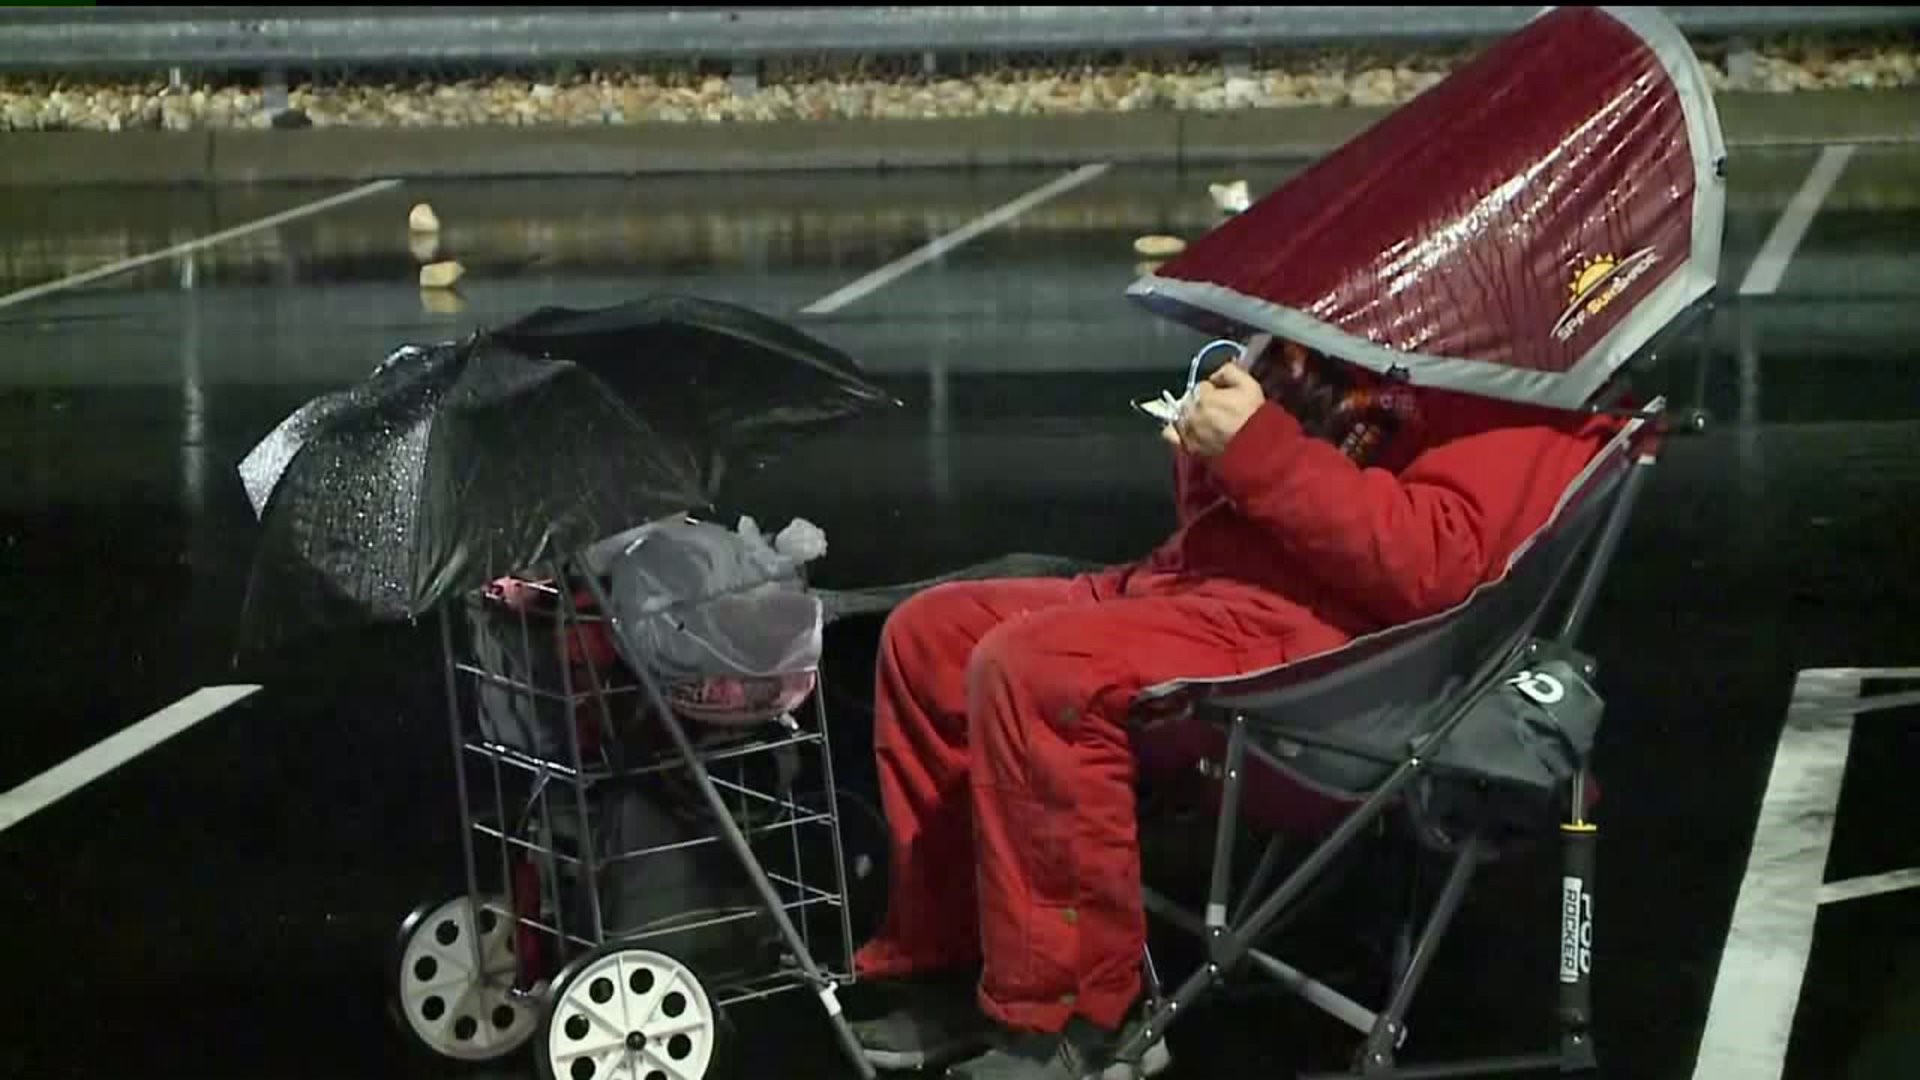 People Camp Outside New Chick-Fil-A in the Rain to Win Free Chicken for a Year